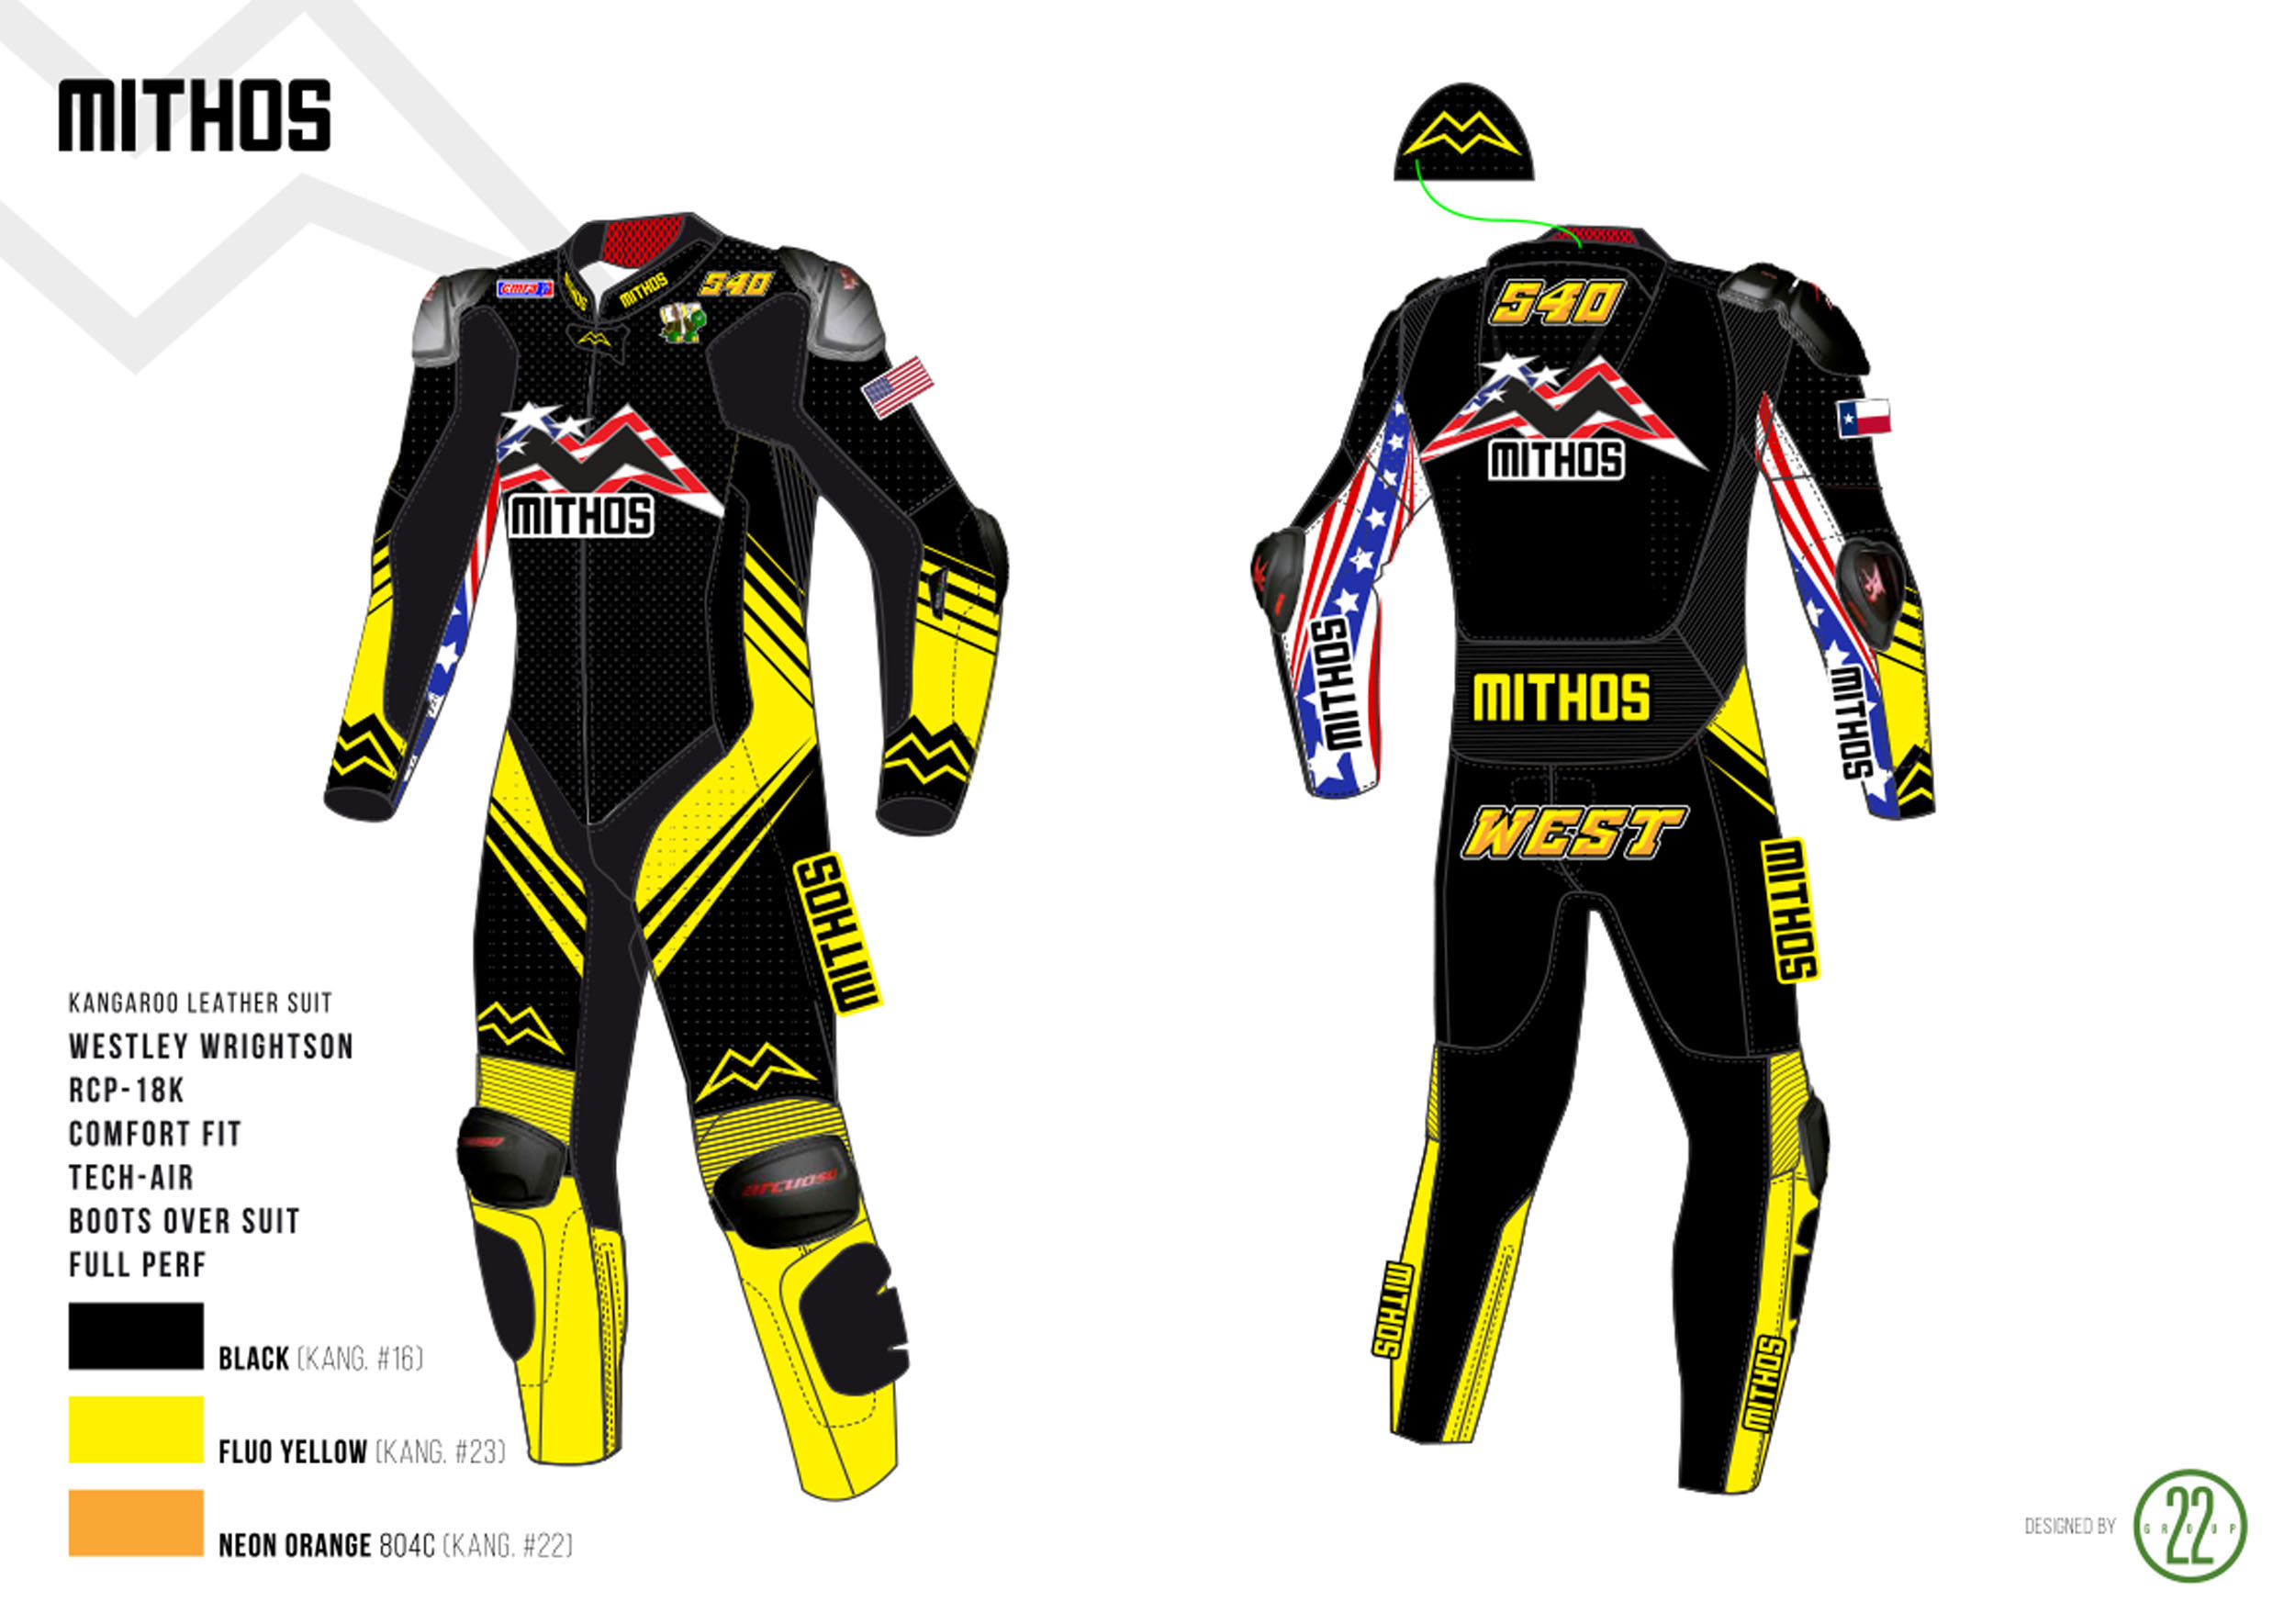 Mithos Kangaroo Leather Suit: RCP-18K, Comfort Fit, Tech-Air, Boots Over Suit, Full PerfDesign